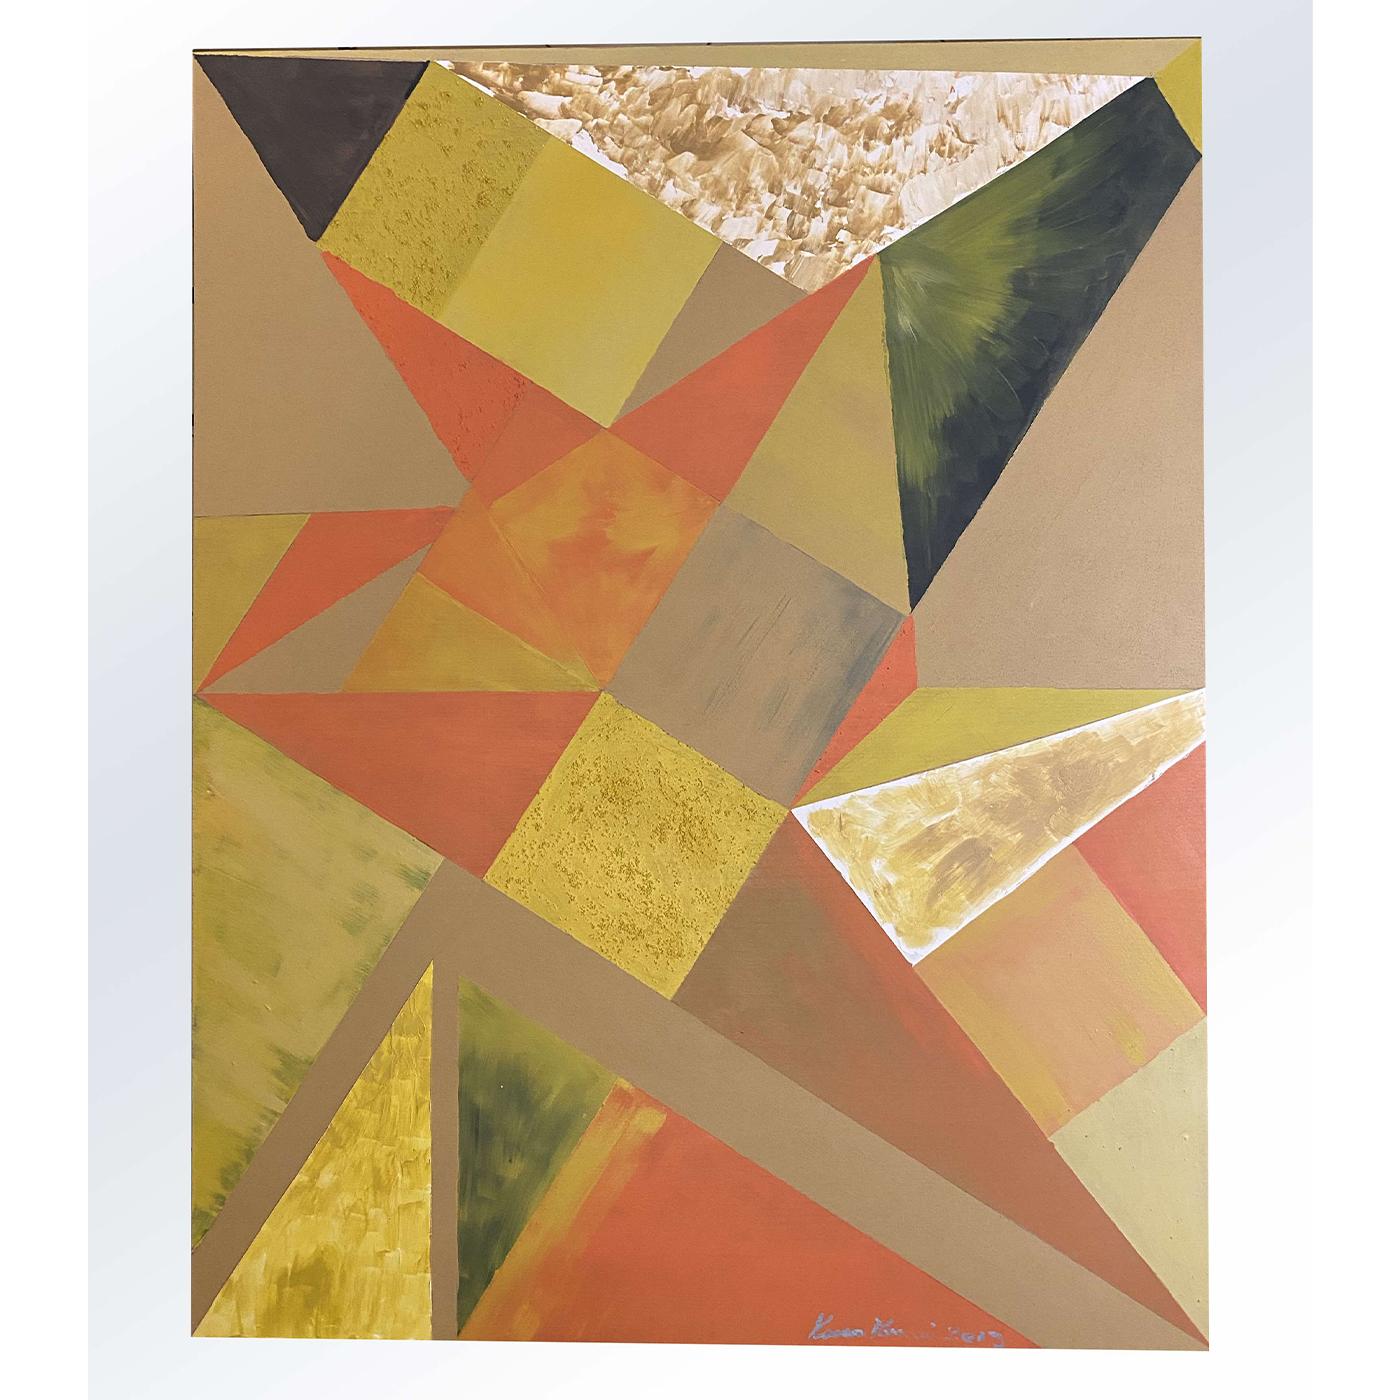 With a stunning display of color and geometric shapes, the decorative wall panel, Geometrie Quattro by Mascia Meccani 2019, in wood hand painted with a mixture of techniques, will add class and creative flair to your contemporary living space. The